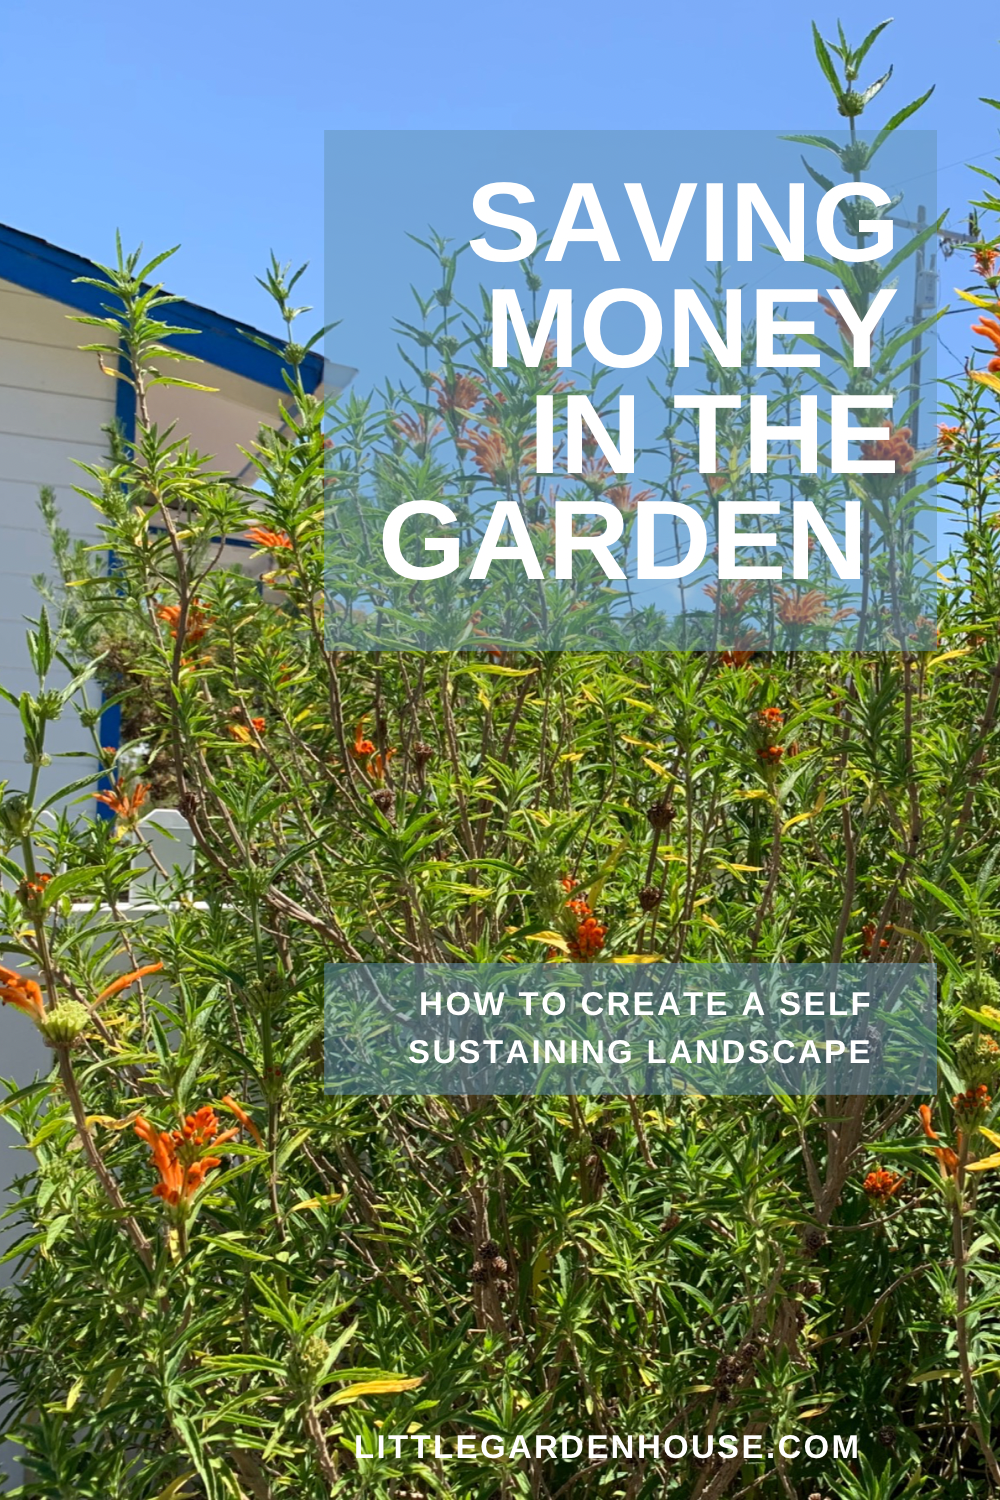 How to Save Money in the Garden by creating a self sustaining landscape